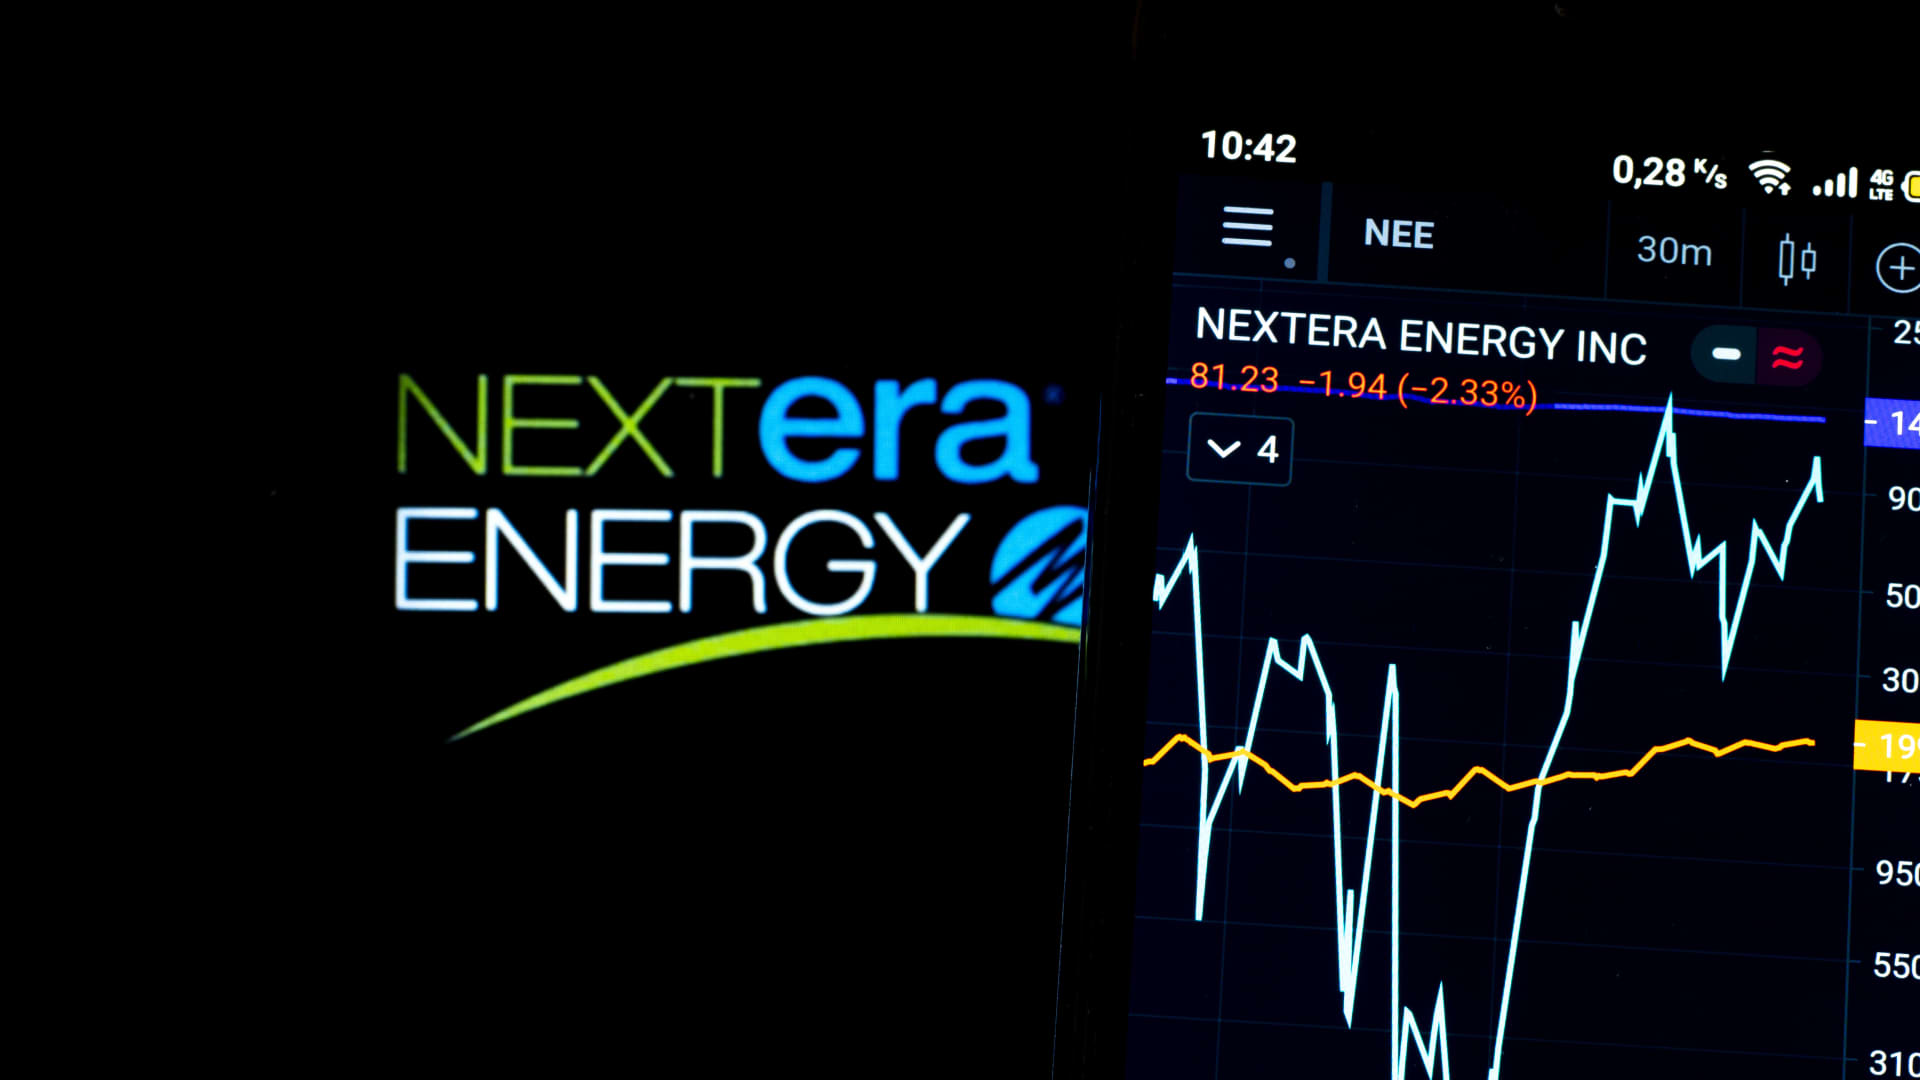 In this photo illustration the stock market information of NextEra Energy, Inc. seen displayed on a smartphone with NextEra Energy, Inc. logo in the background.